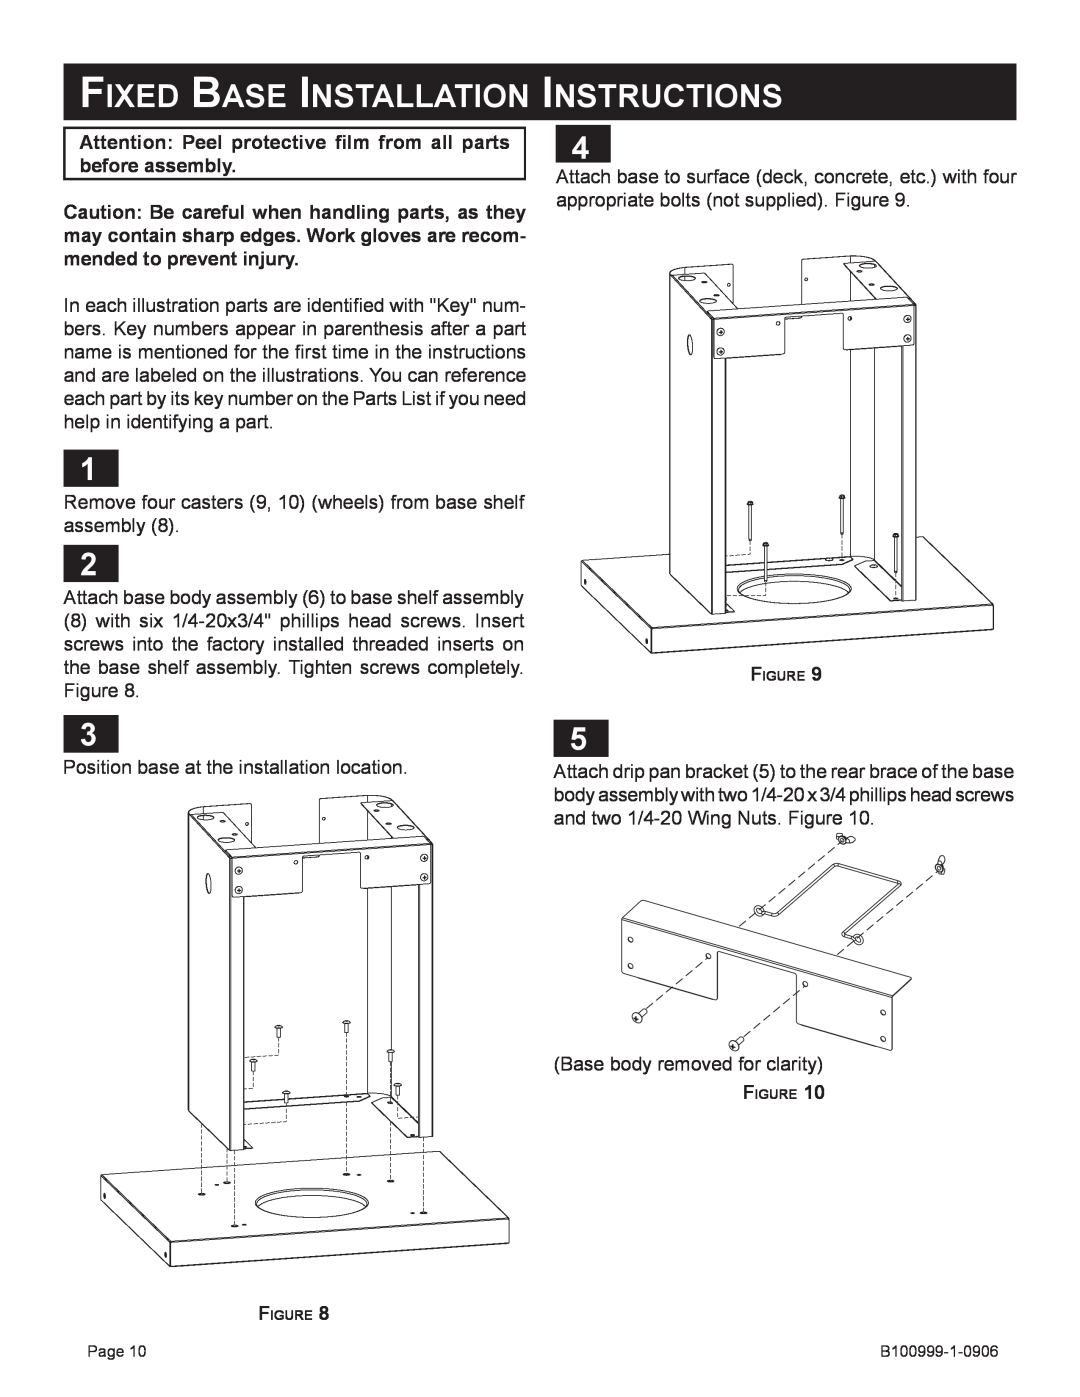 Broilmaster DC2CART-1 Fixed Base Installation, Instructions, Attention Peel protective ﬁlm from all parts before assembly 